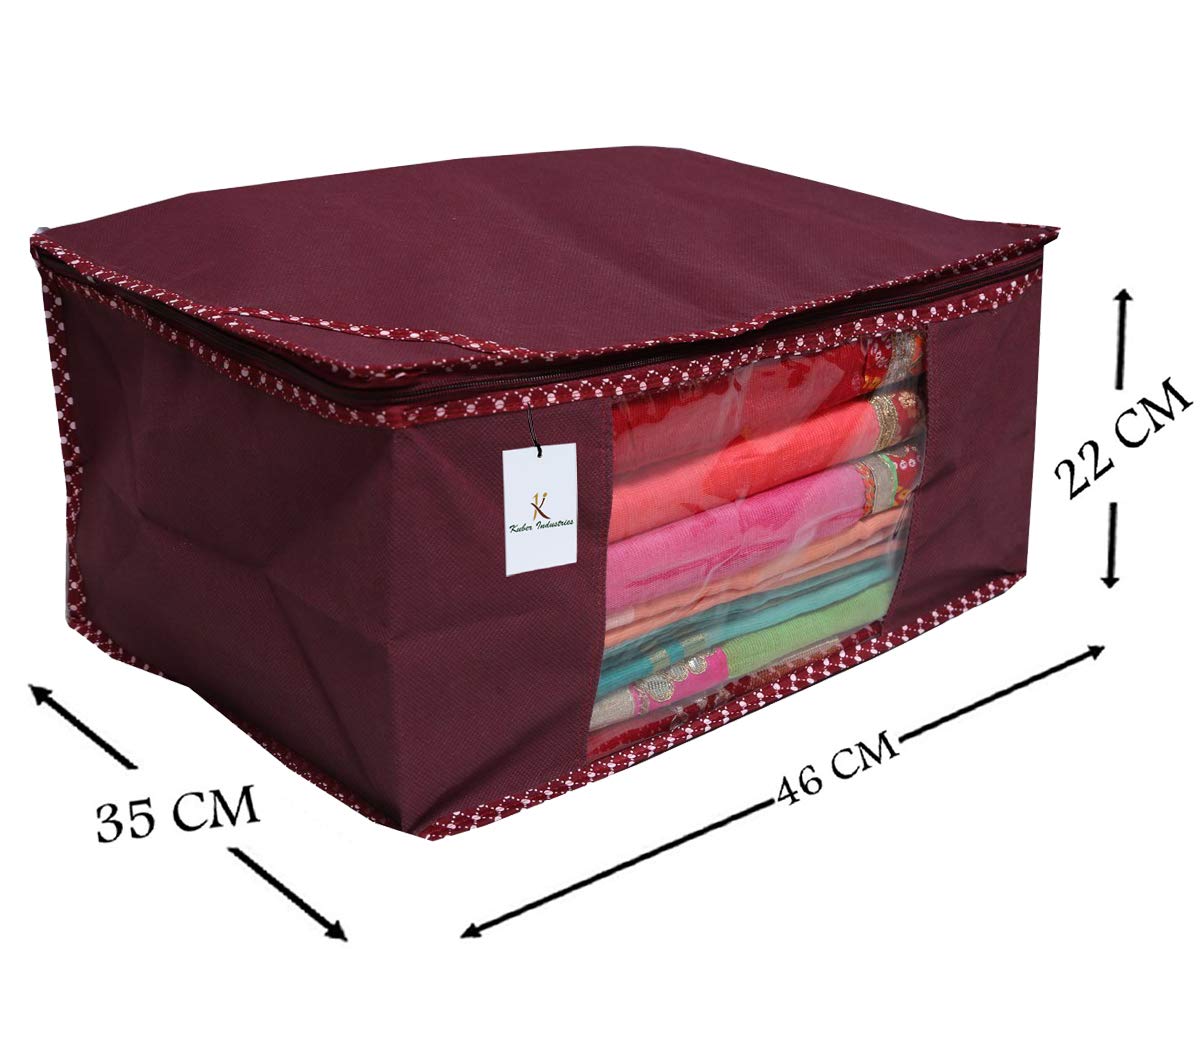 Kuber Industries Saree Covers With Zip|Saree Covers For Storage|Saree Packing Covers For Wedding|Pack of 3 (Maroon)